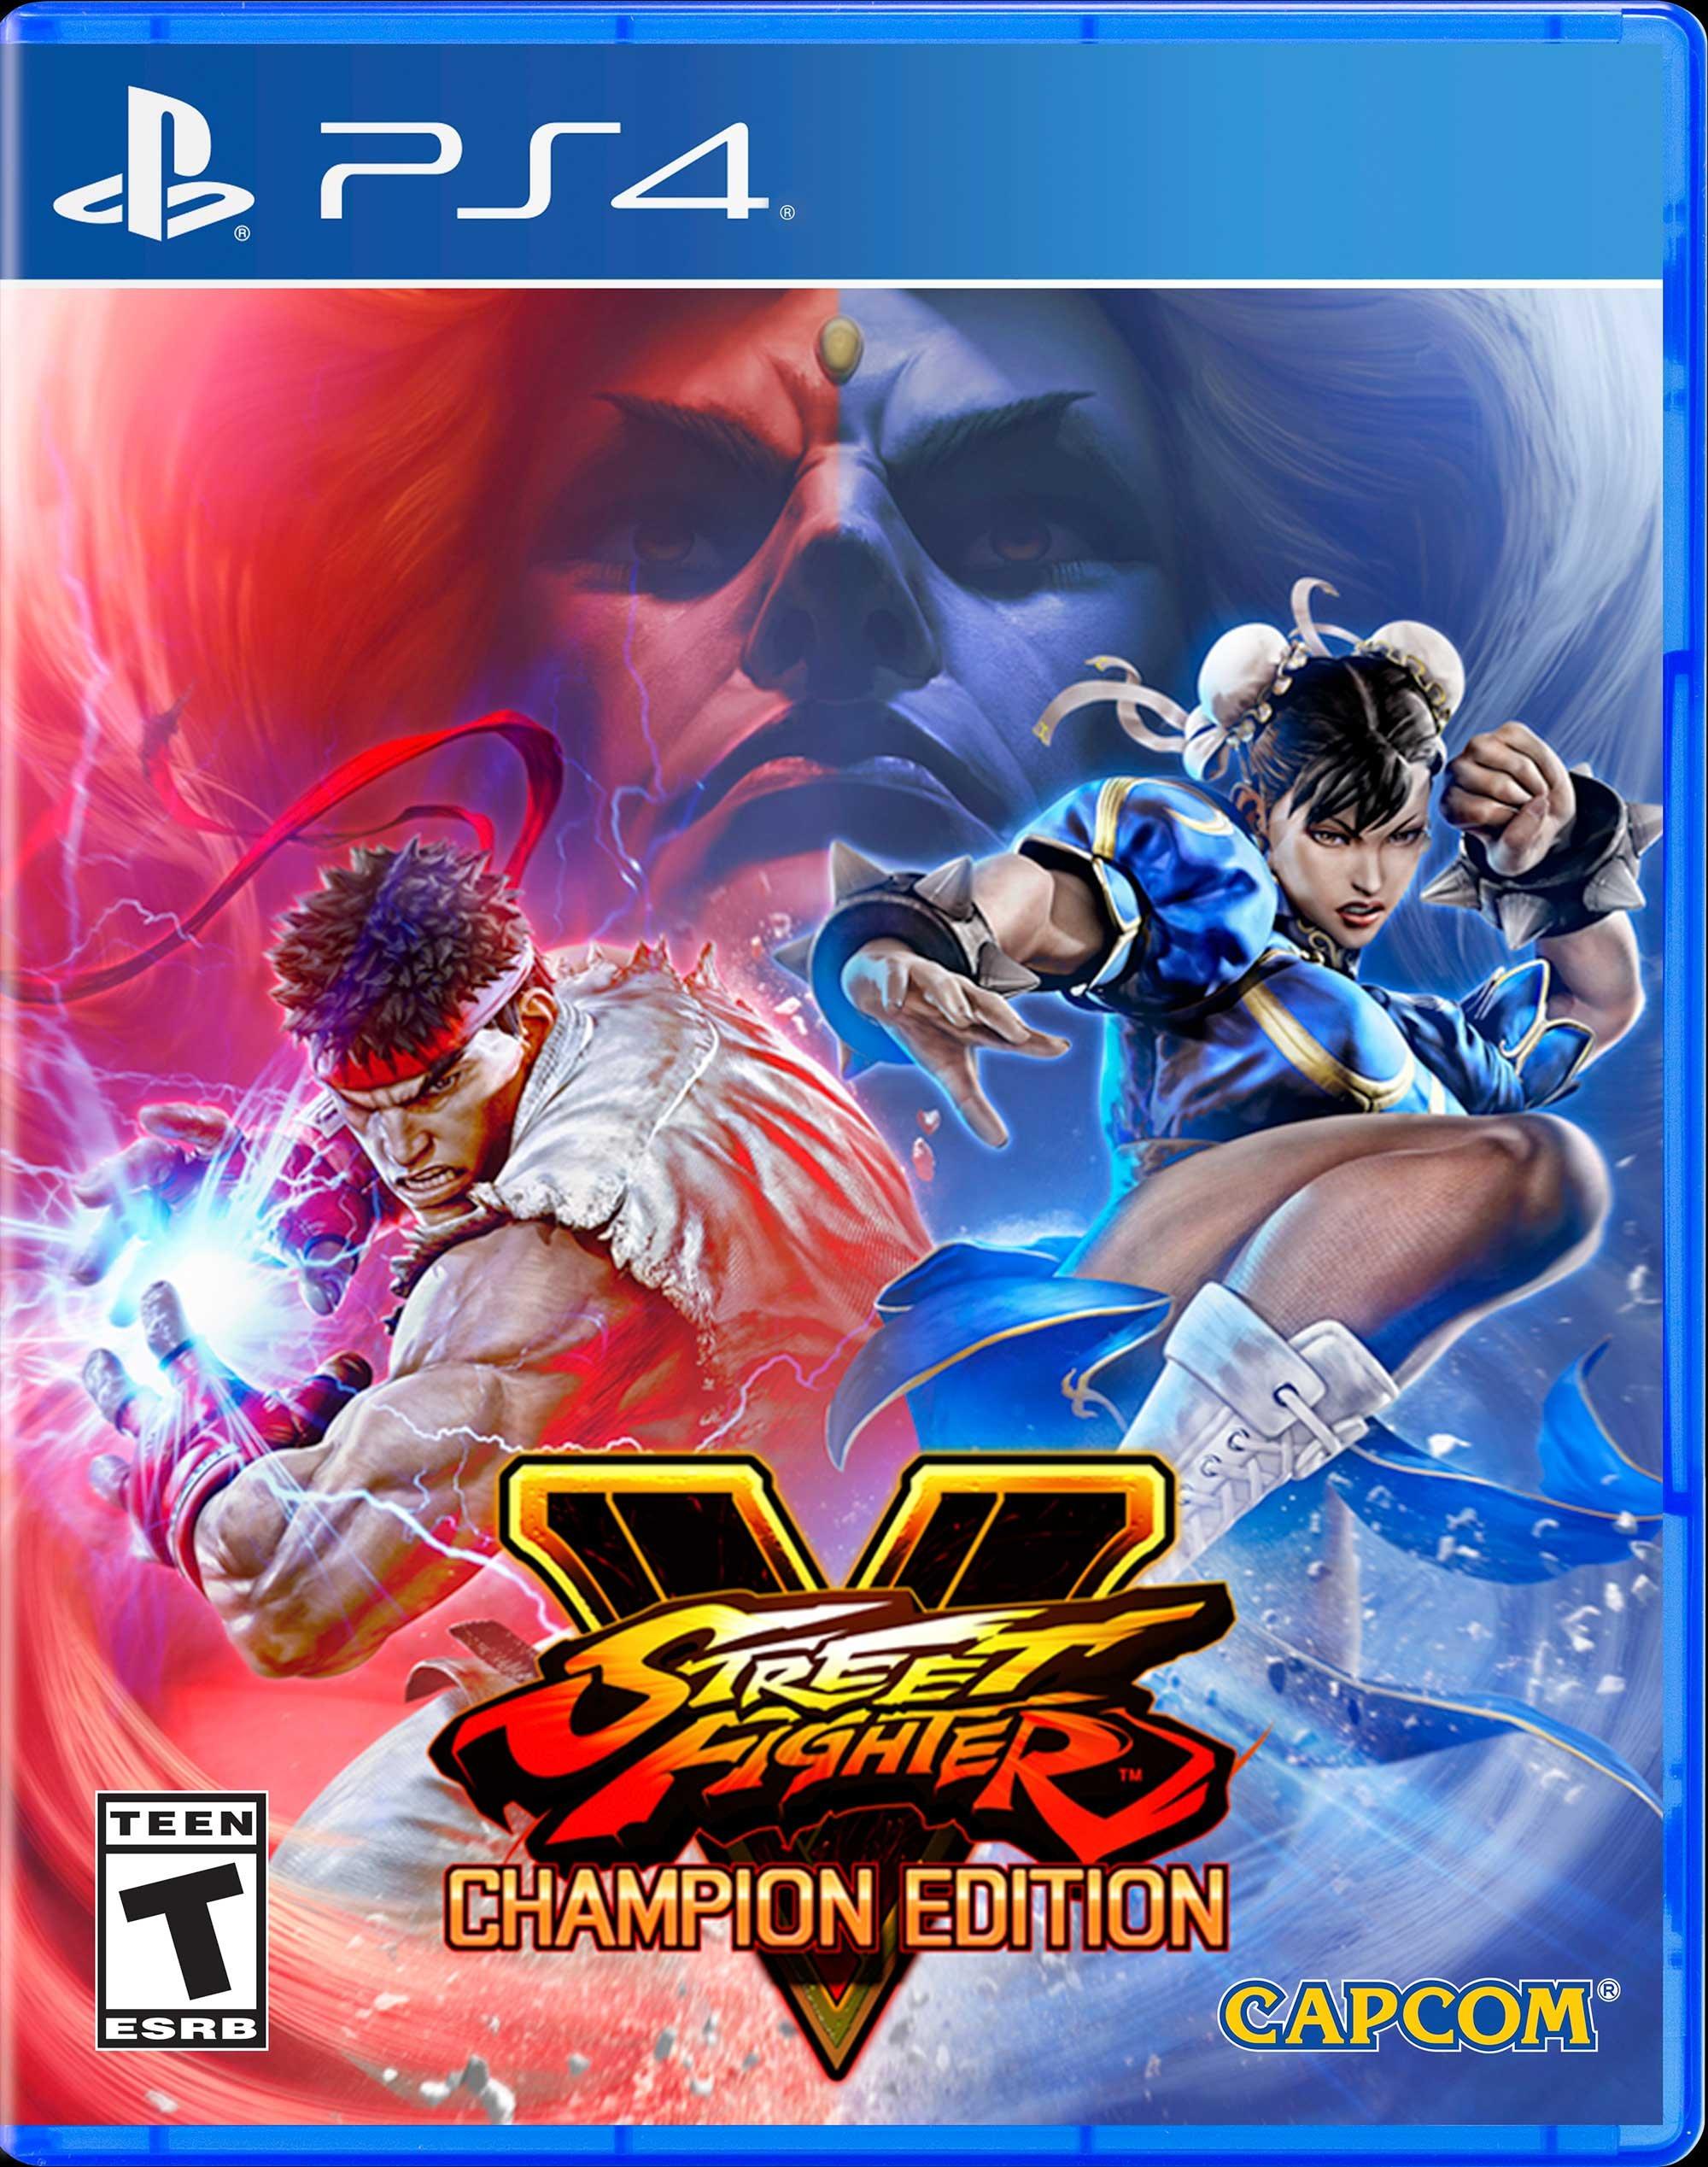 Street Fighter V: Champion Edition (for PC) Review